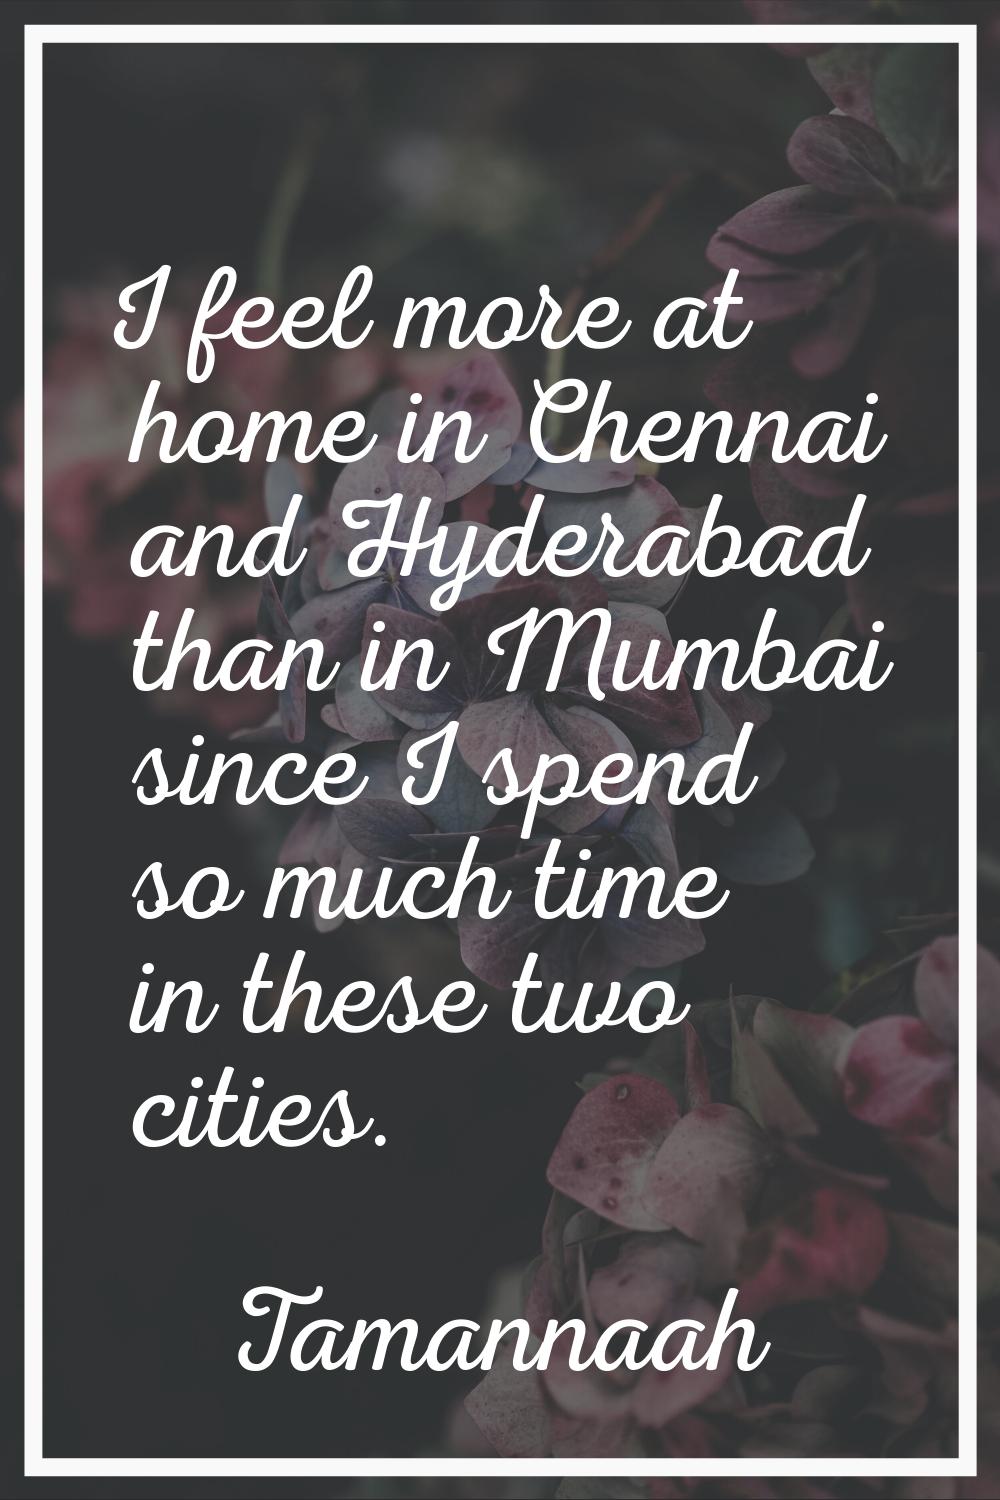 I feel more at home in Chennai and Hyderabad than in Mumbai since I spend so much time in these two